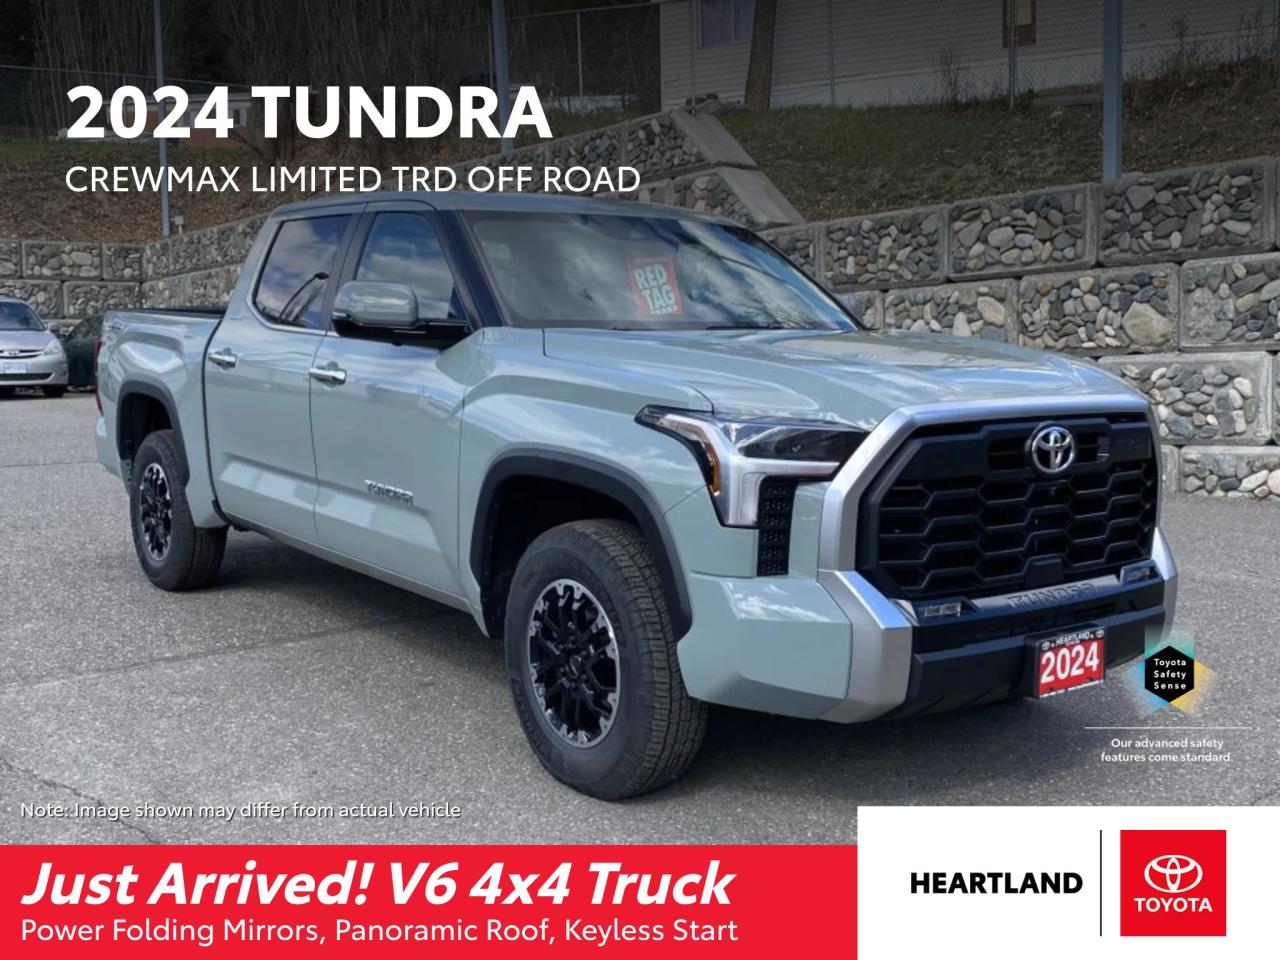 2024 Toyota Tundra Crewmax Limited TRD Off Road Photo0